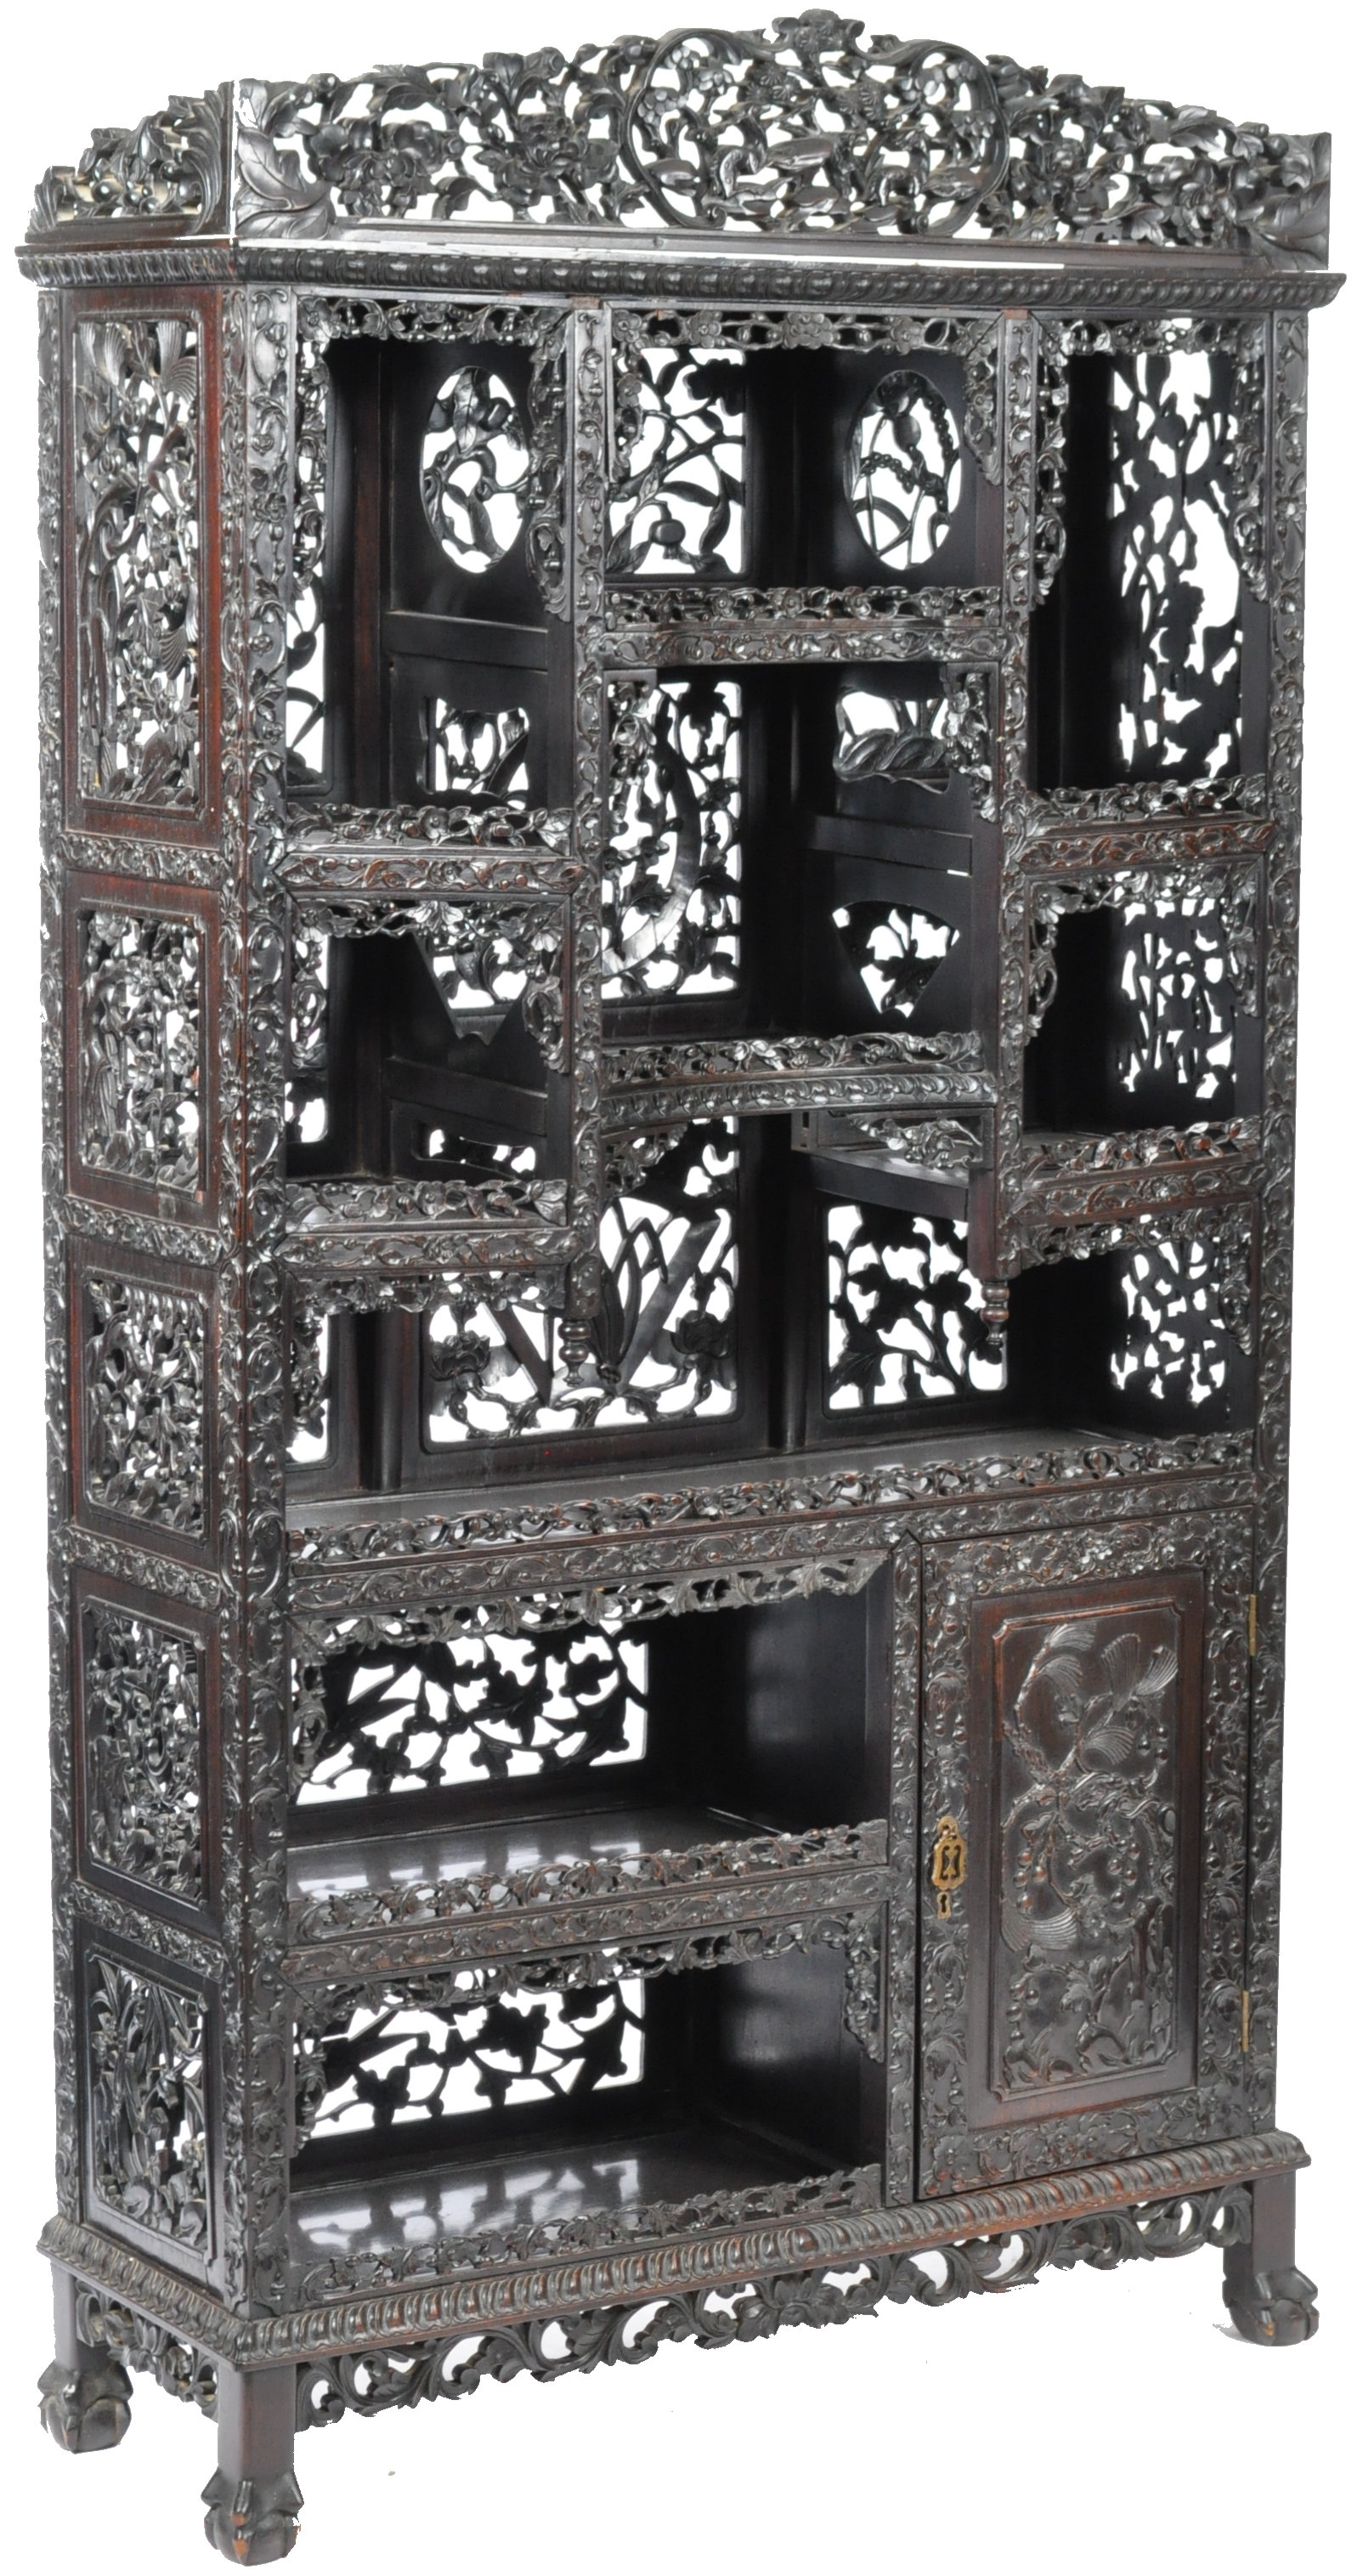 IMPRESSIVE 19TH CENTURY CHINESE CARVED HARDWOOD DISPLAY CABINET